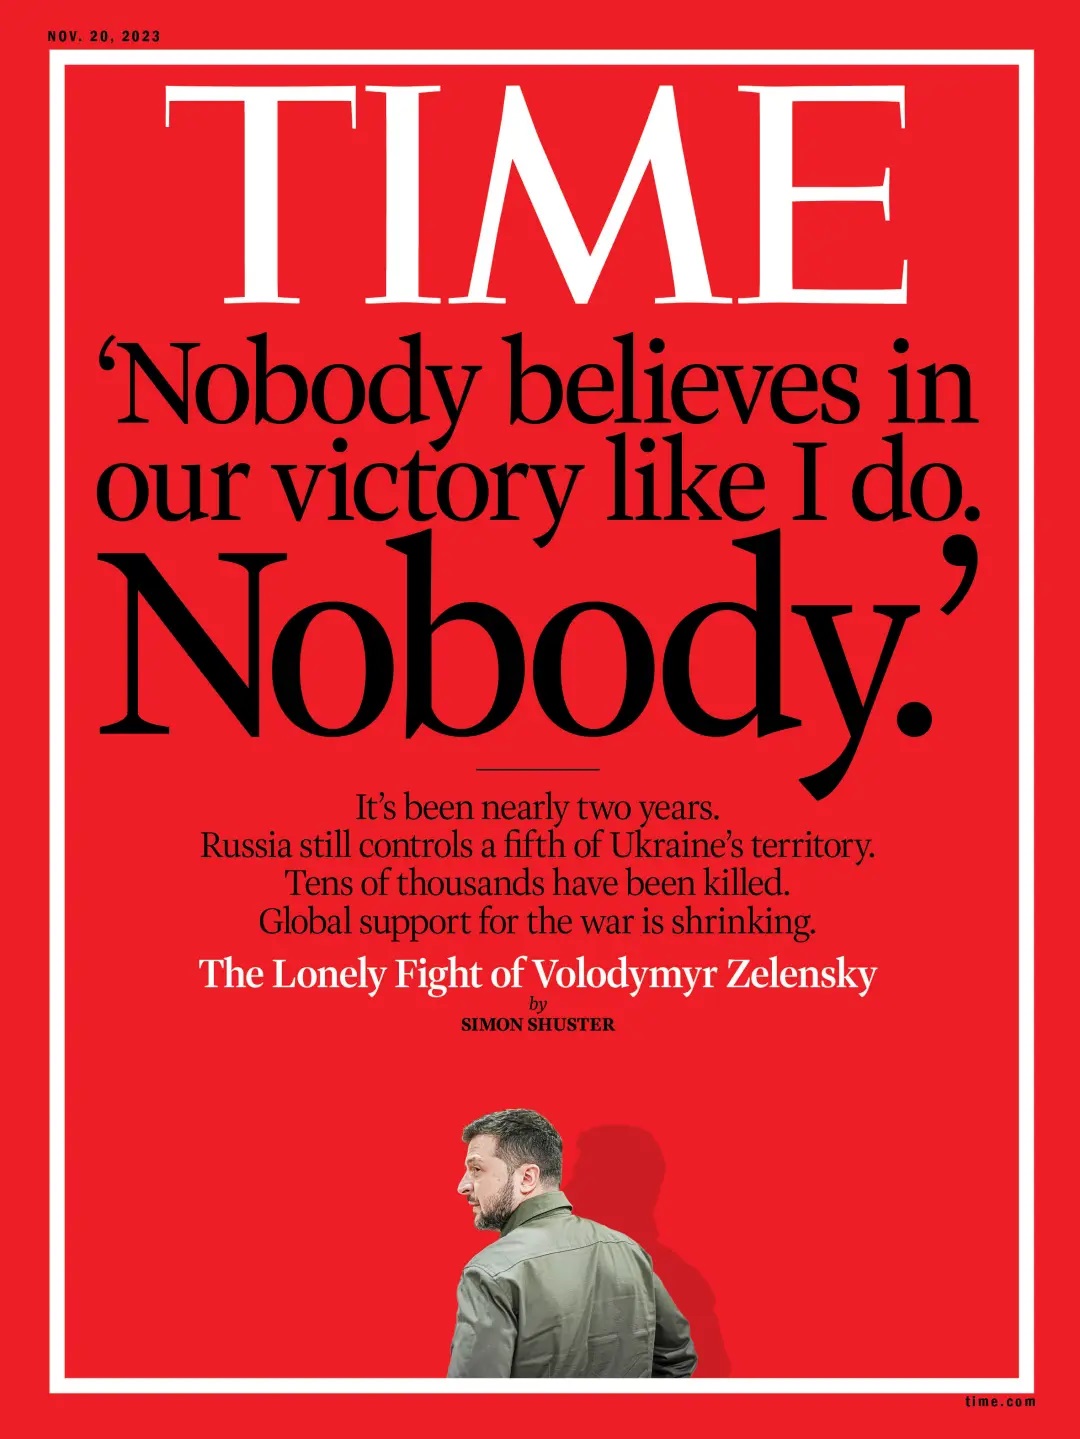 TIME Oct. 30, 2023 Cover on Zelensky Delusional